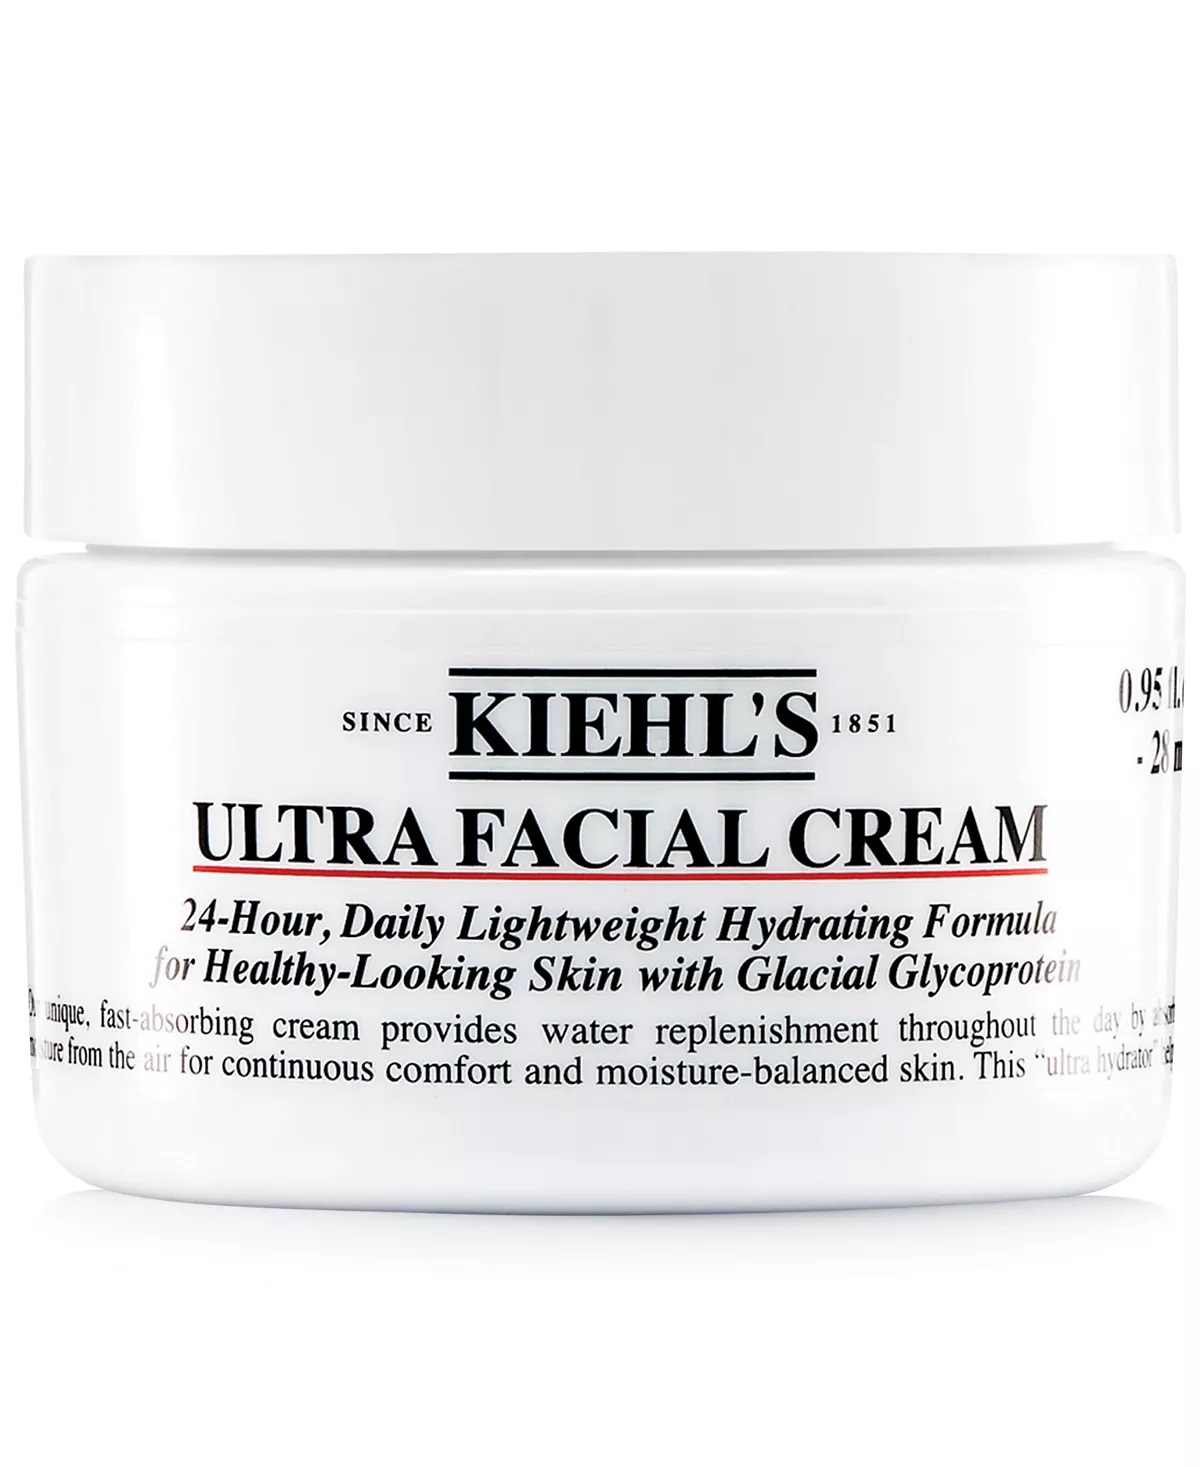 KIEHL'S SINCE 1851 Ultra Facial Cream with Squalane, 0.95 oz.